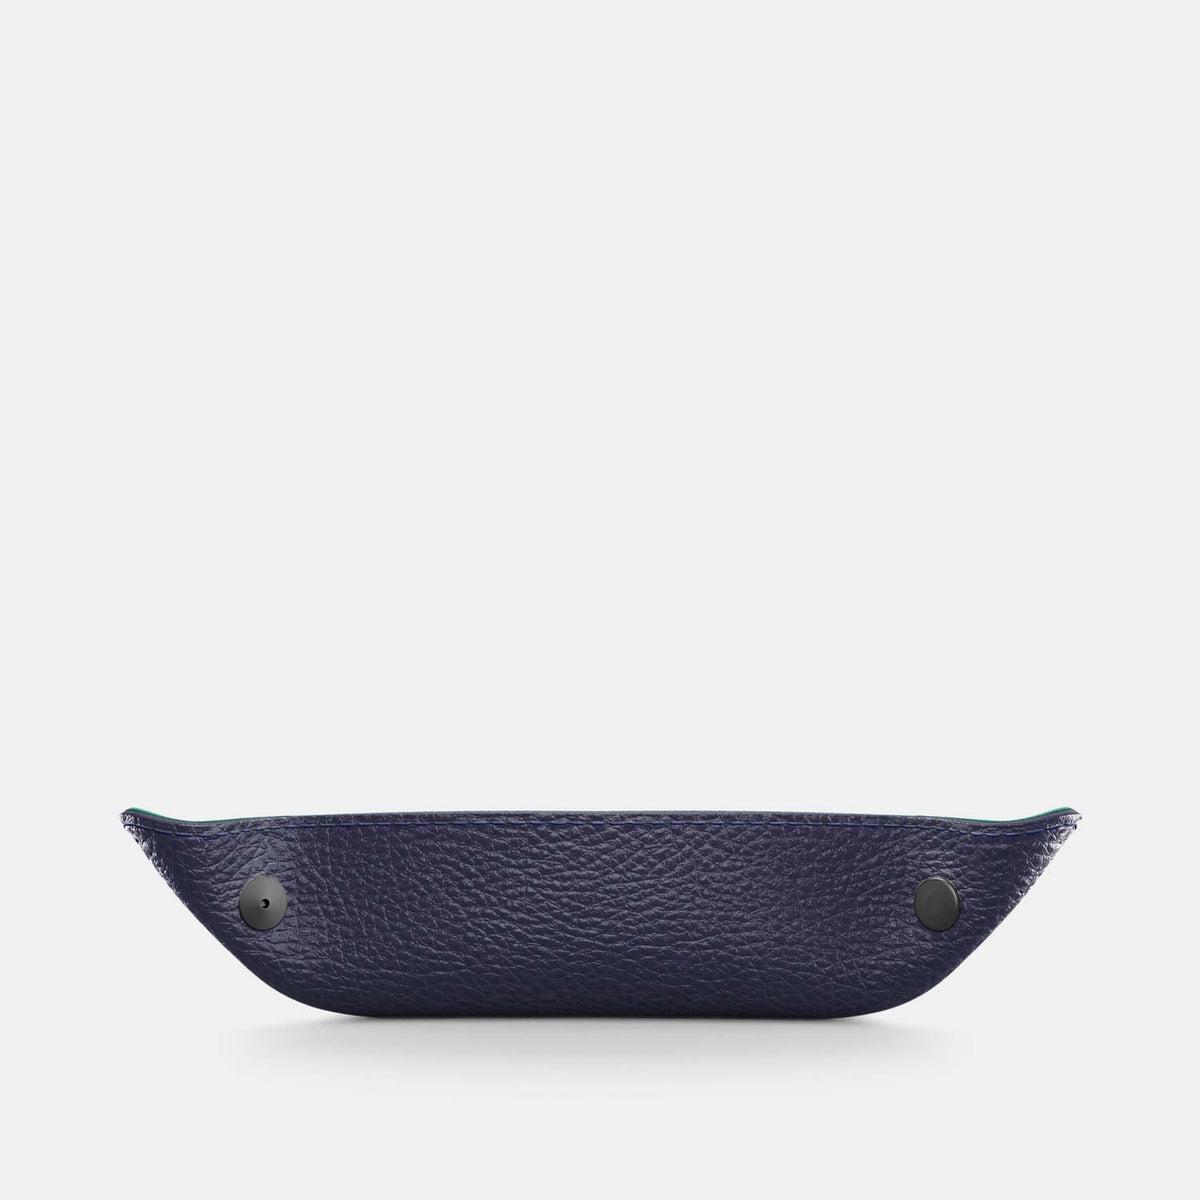 Leather Catch-all Tray - Navy Blue and Mint - RYAN London